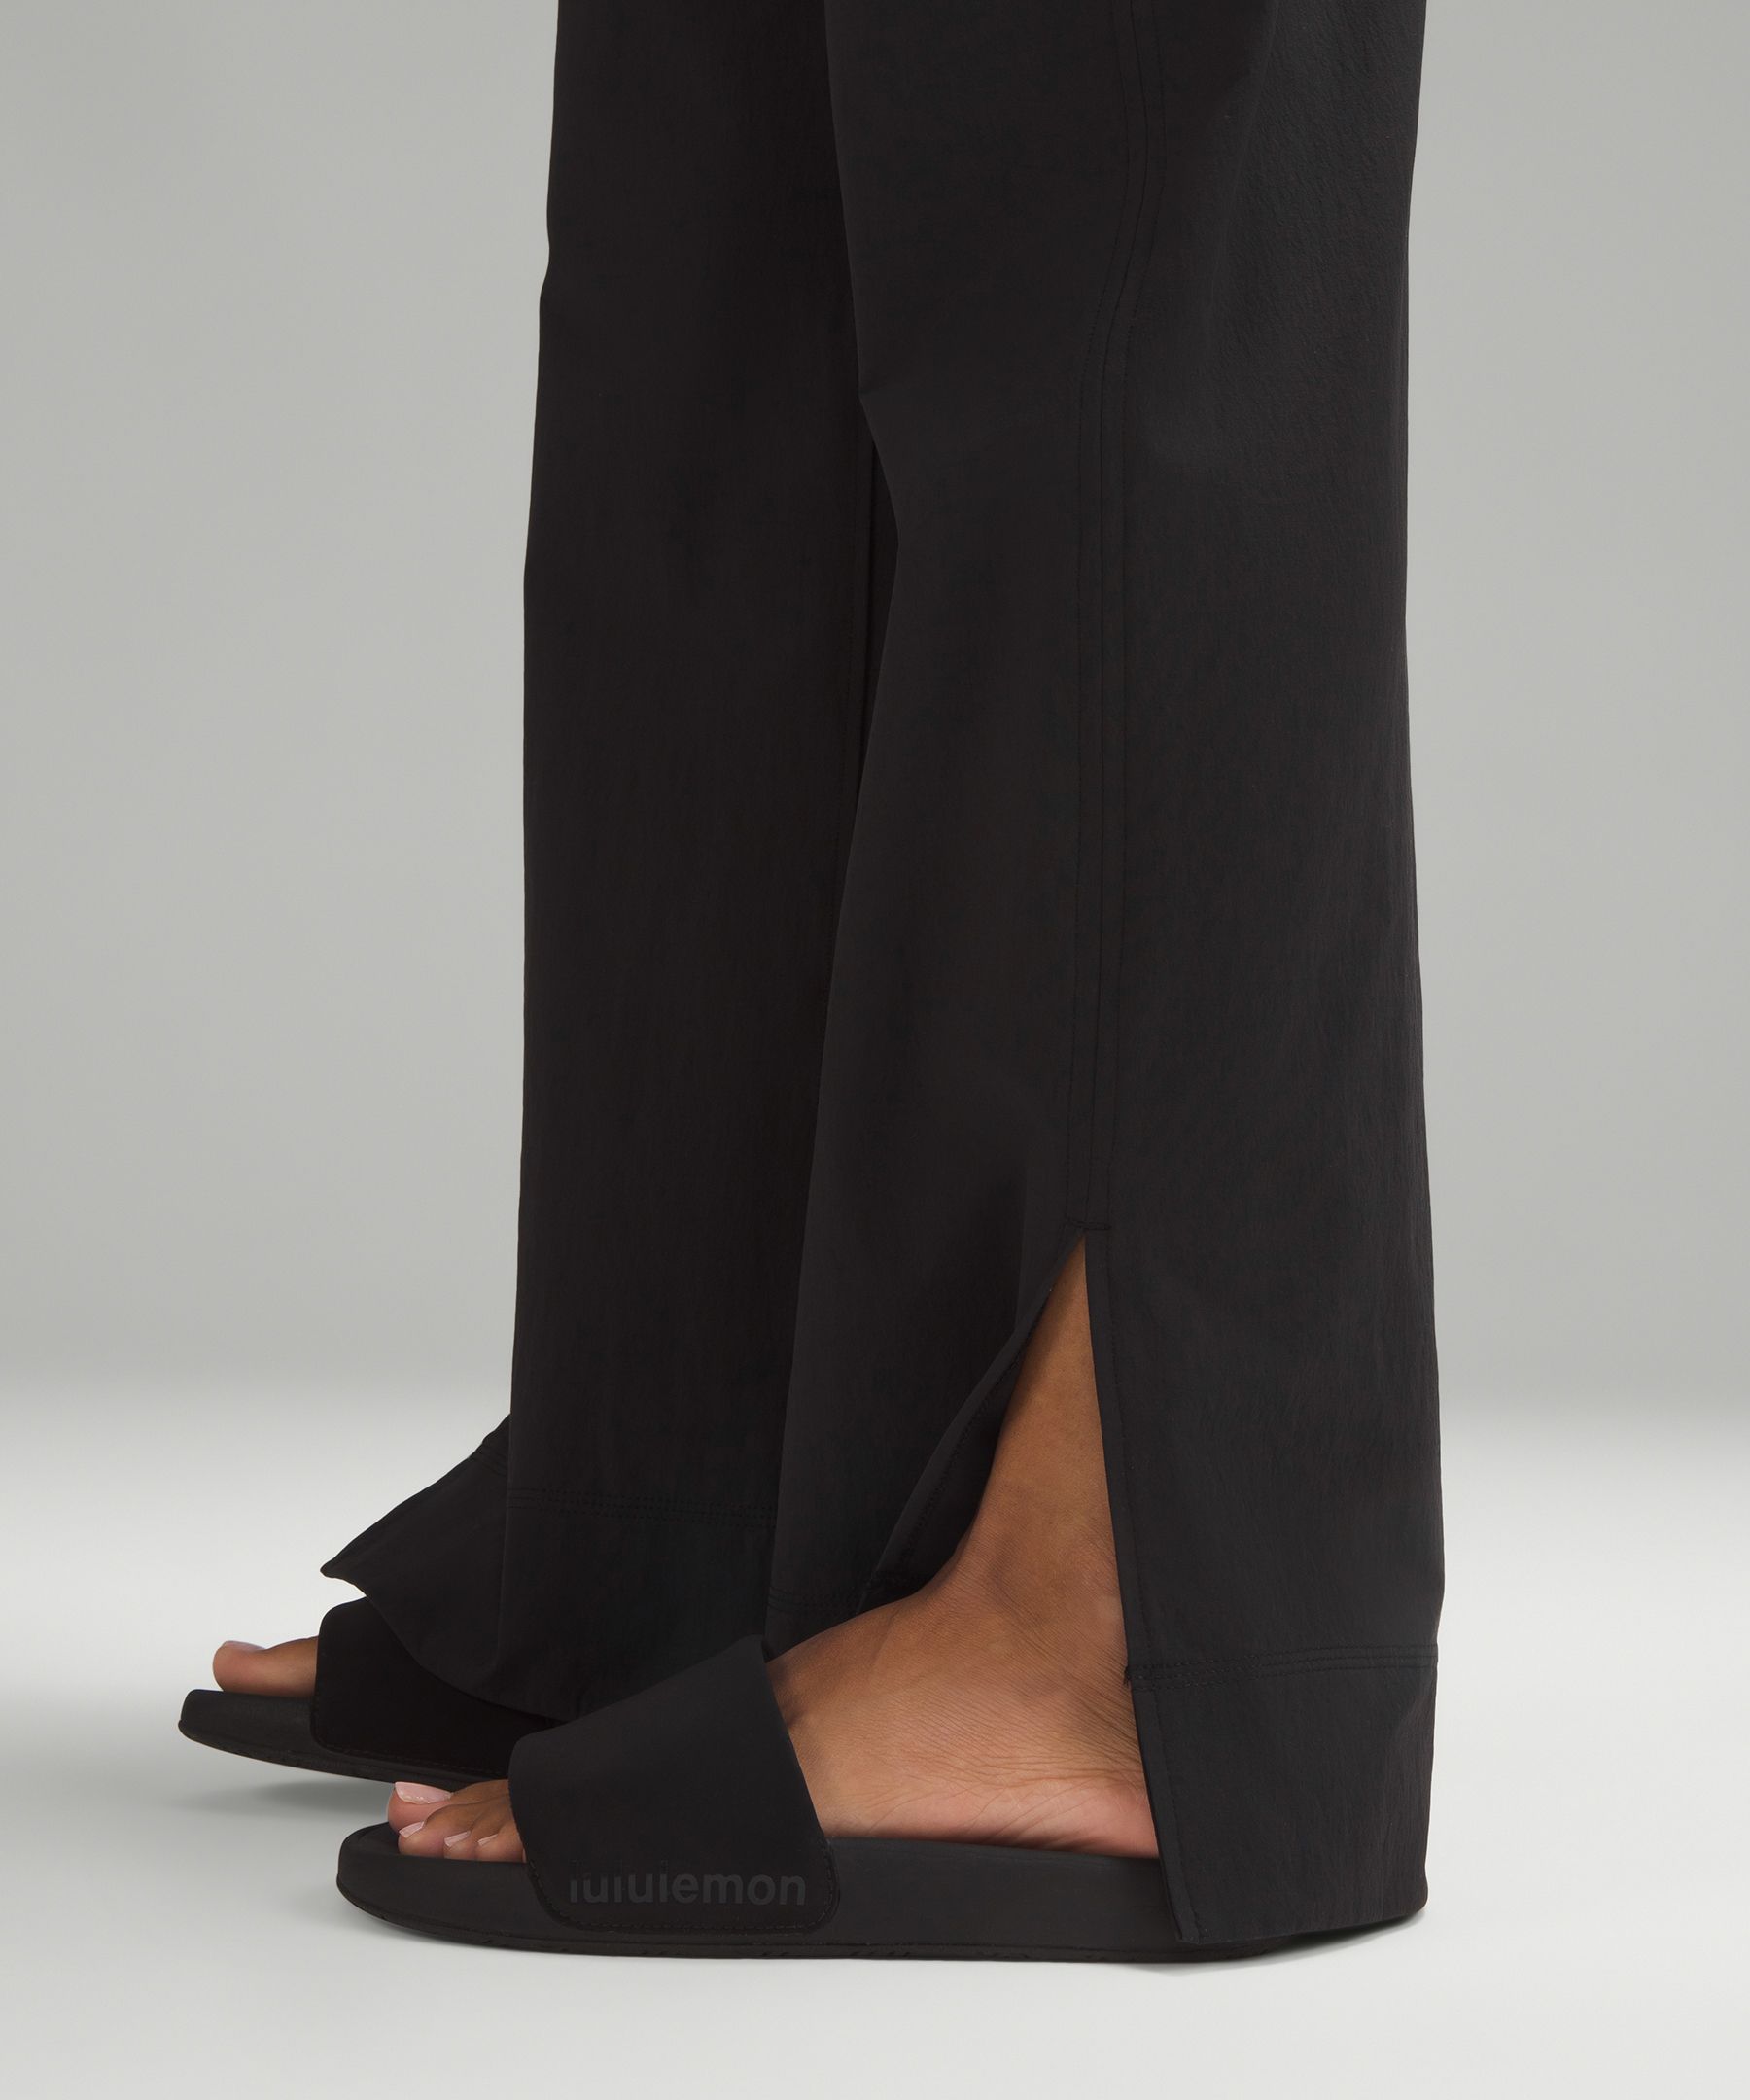 Lululemon On The Fly Pant Black Wide Leg Woven 31.5 Size 12 NWT